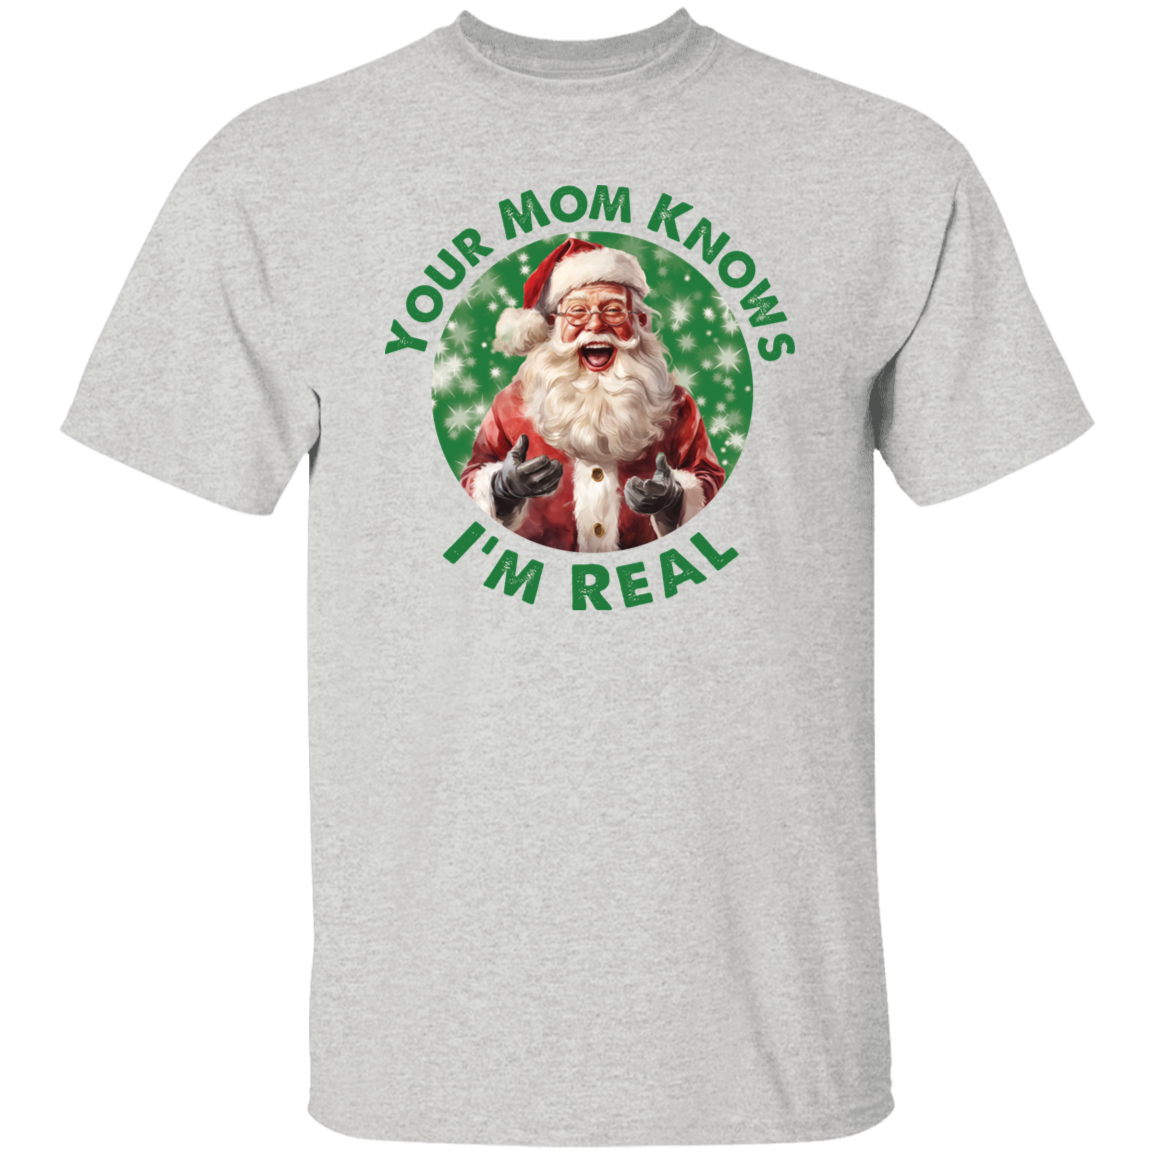 Your Mom Knows I'm Real G500 5.3 oz. T-Shirt